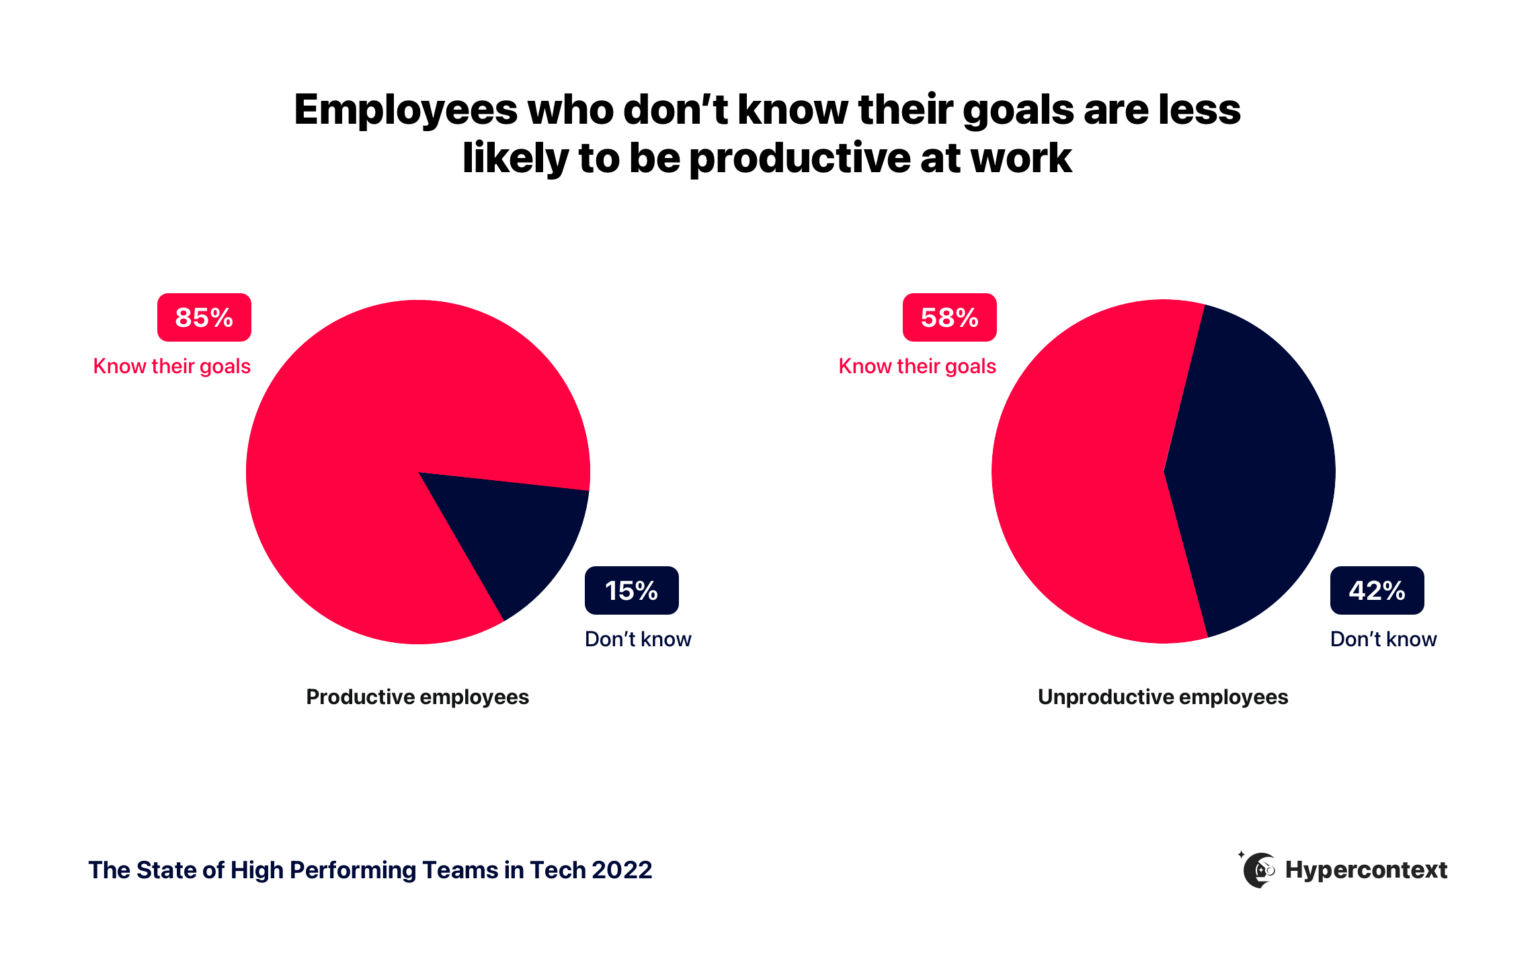 Hypercontext's state of high performing teams report showing percentage of employees who don't feel productive when they don't know their goals